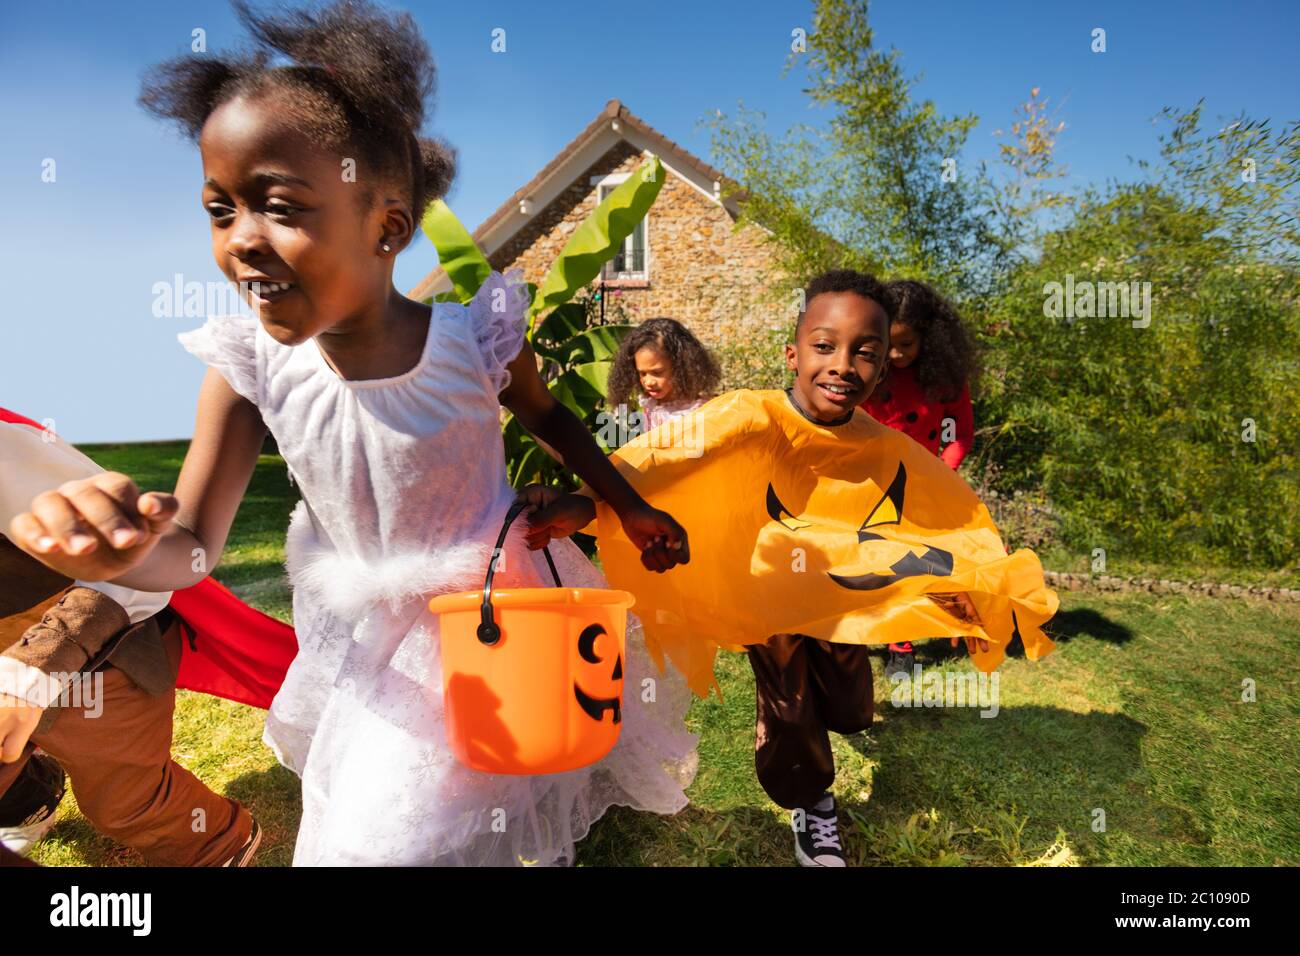 Close portrait of a group of little children run in Halloween costume on the lawn before the house holding hands Stock Photo